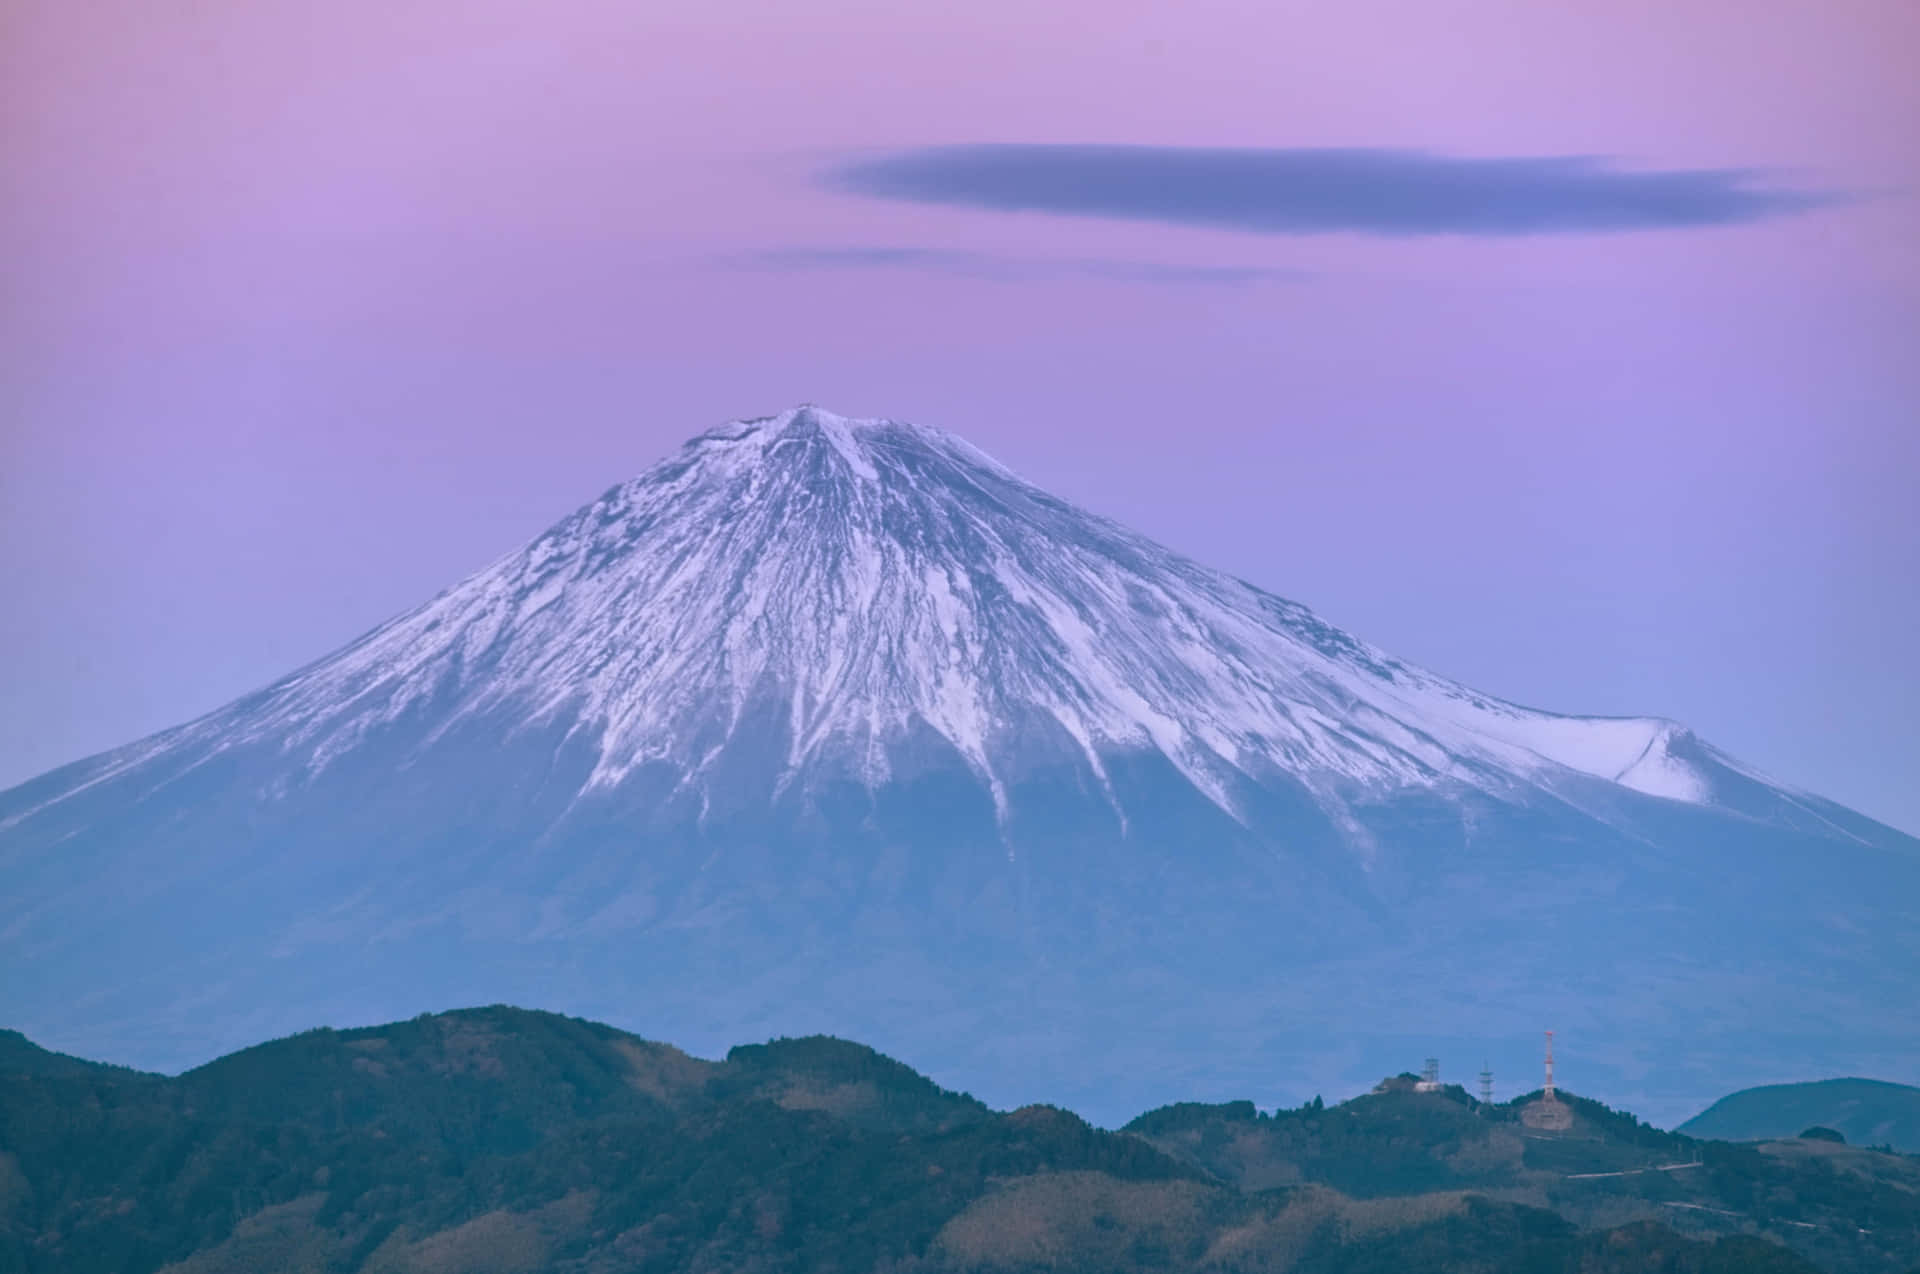 The glorious Mount Fuji, painted against the horizon